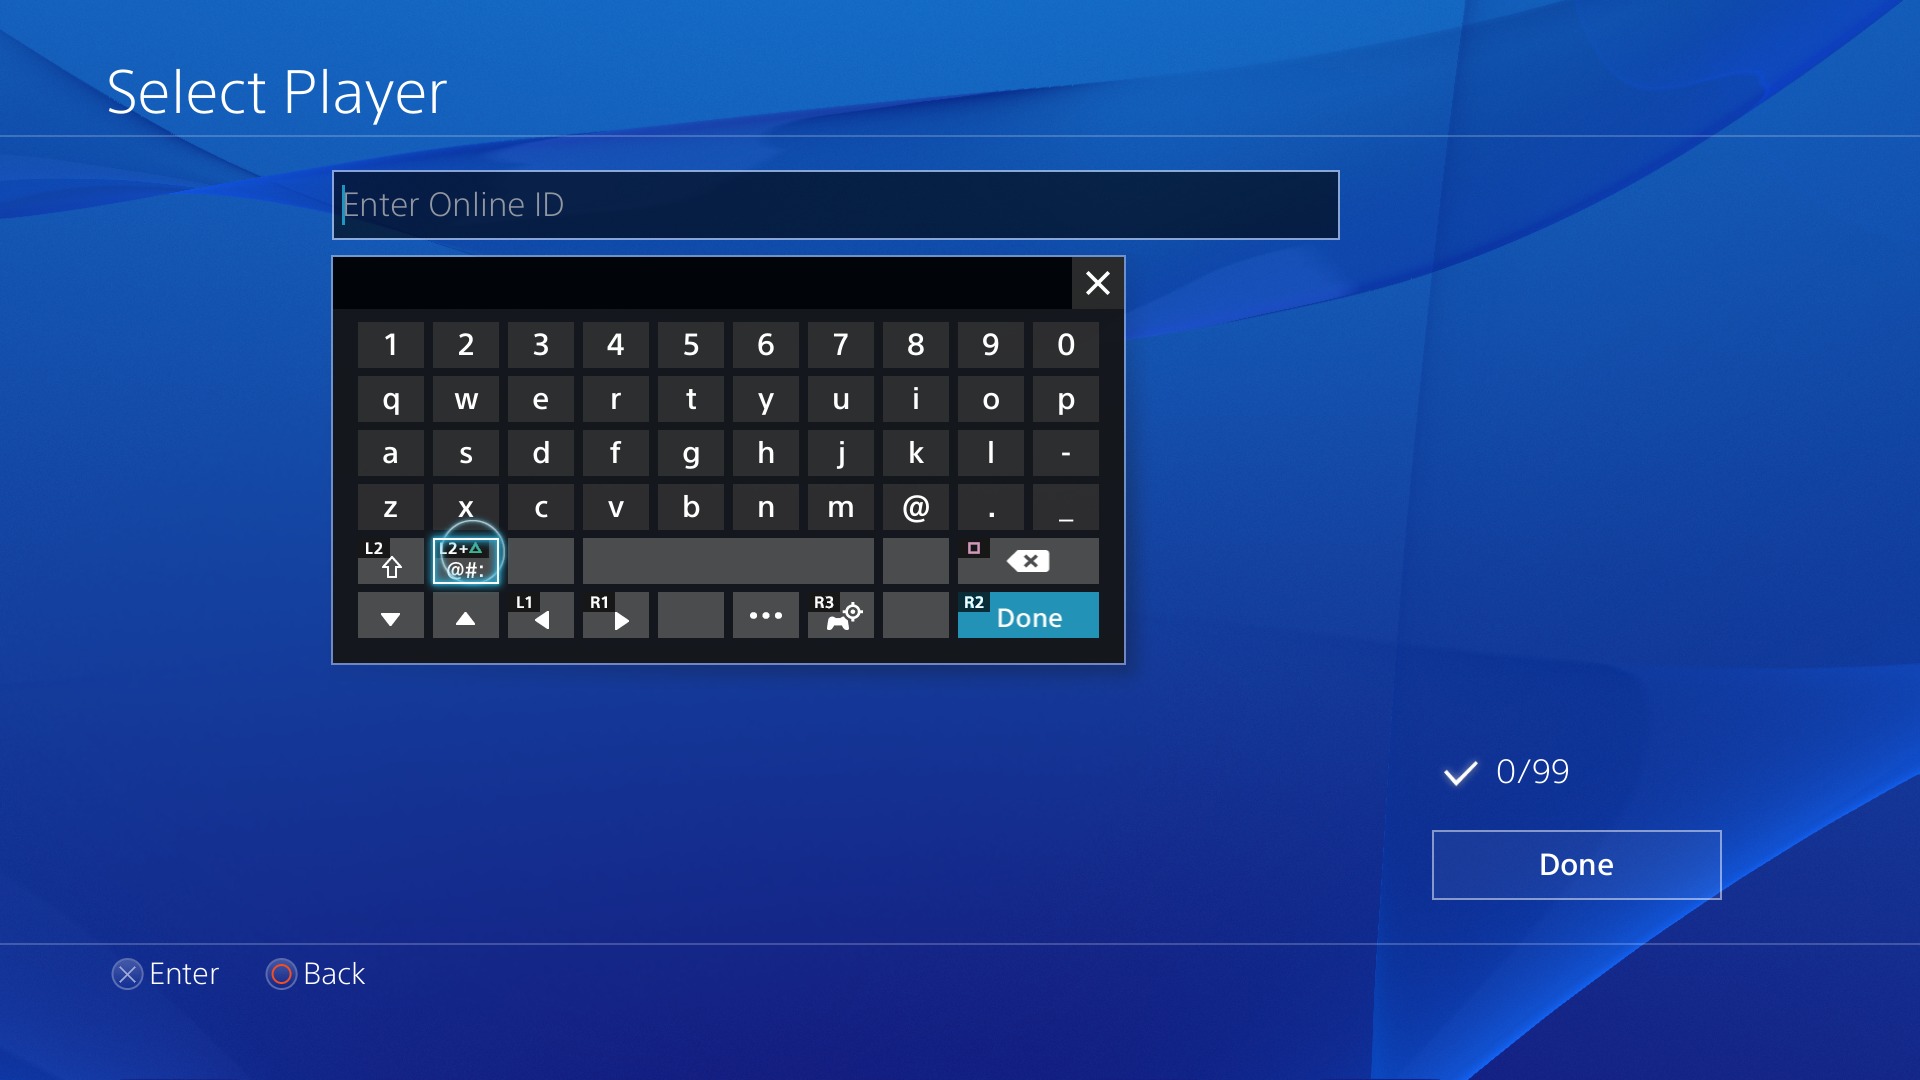 PS4 Firmware v1.70 Includes Undocumented Features and ... - 1920 x 1080 jpeg 218kB